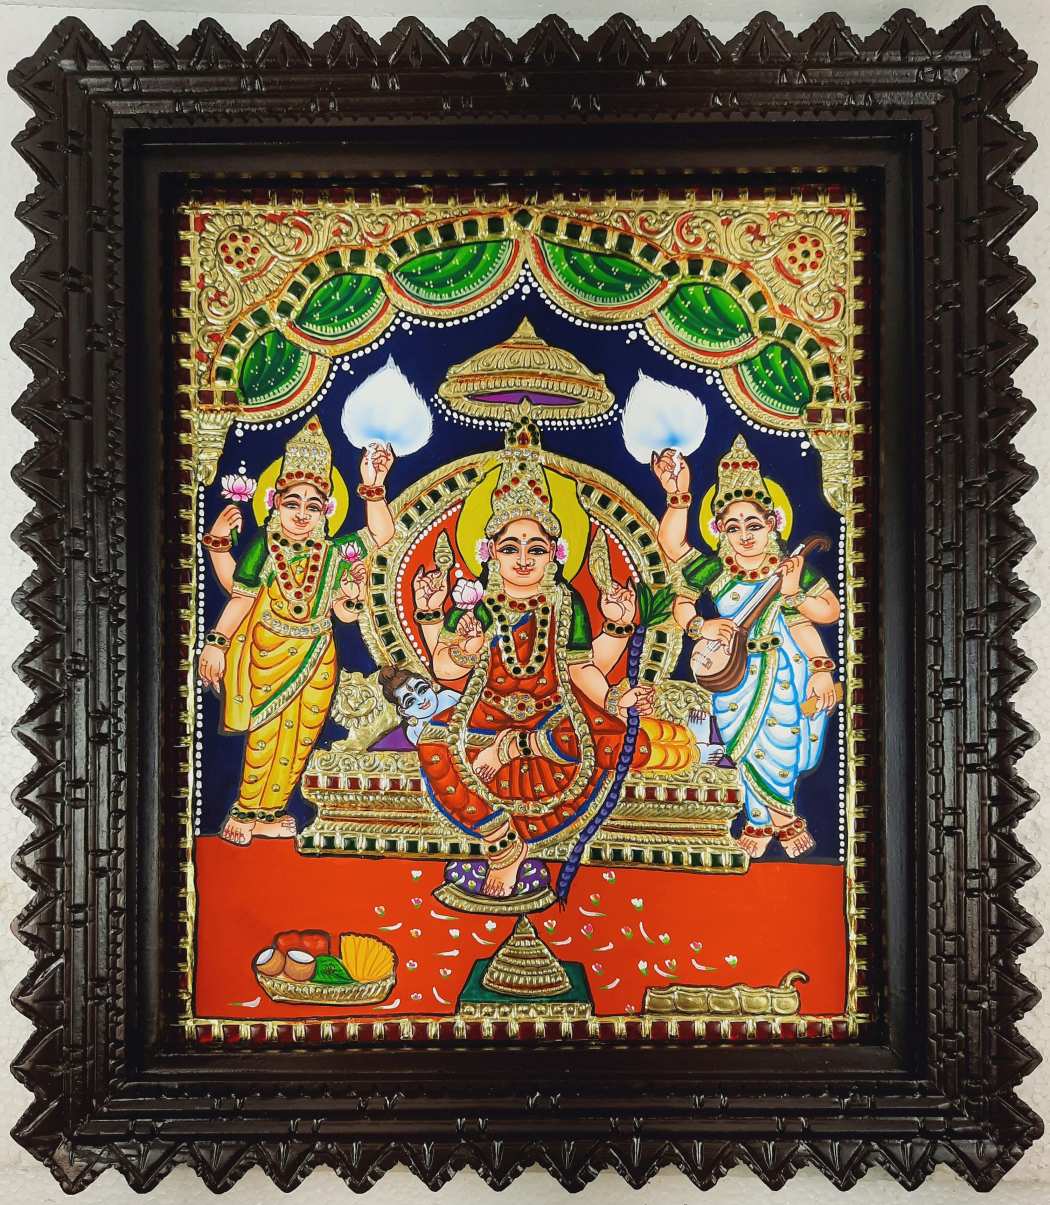 Tanjore Painting Lalitha Devi